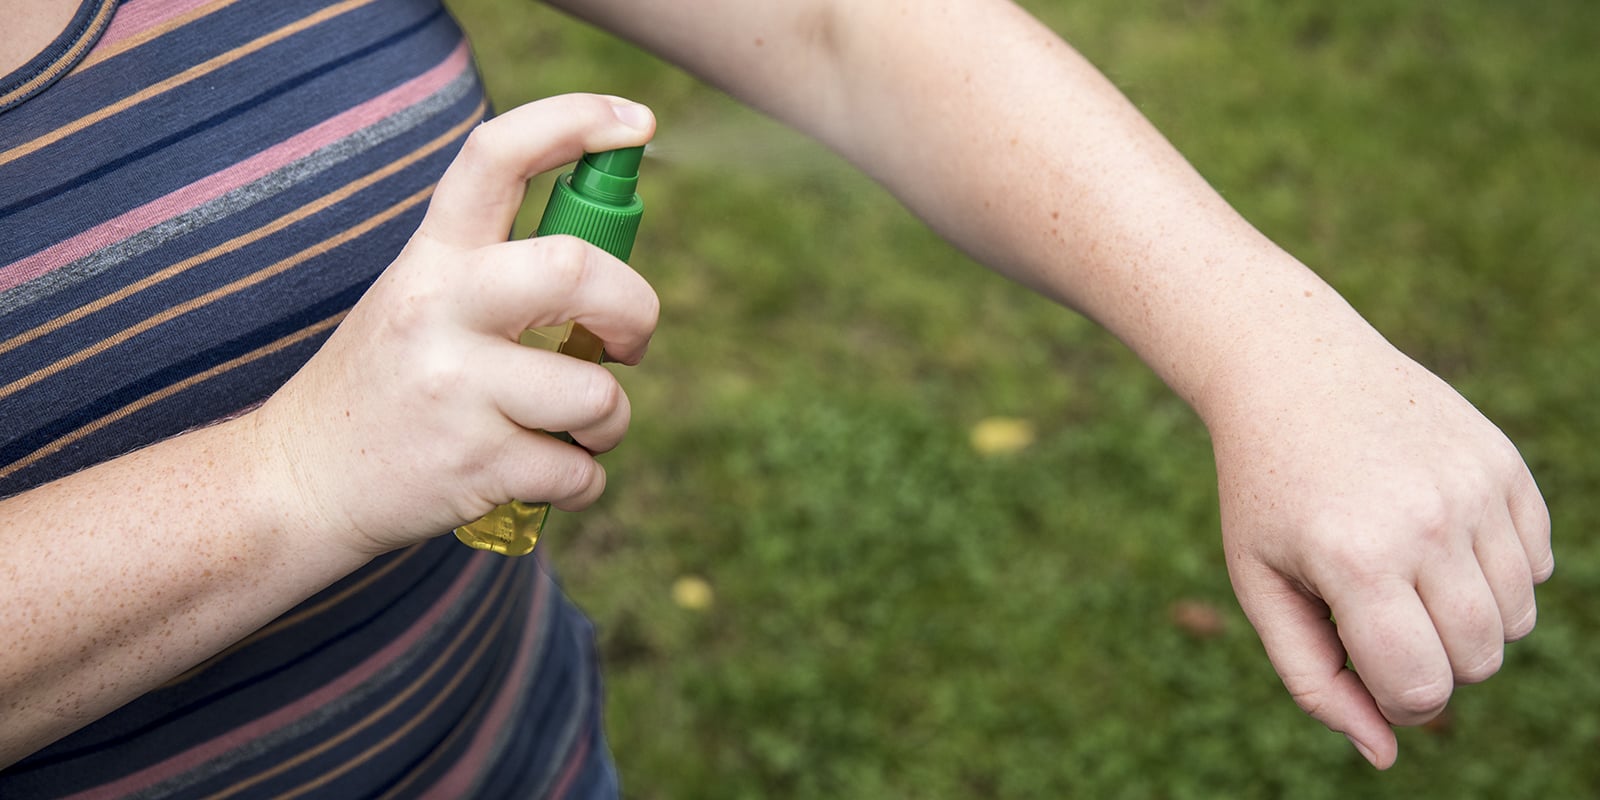 Insect repellents, aka "Mosquito sprays"